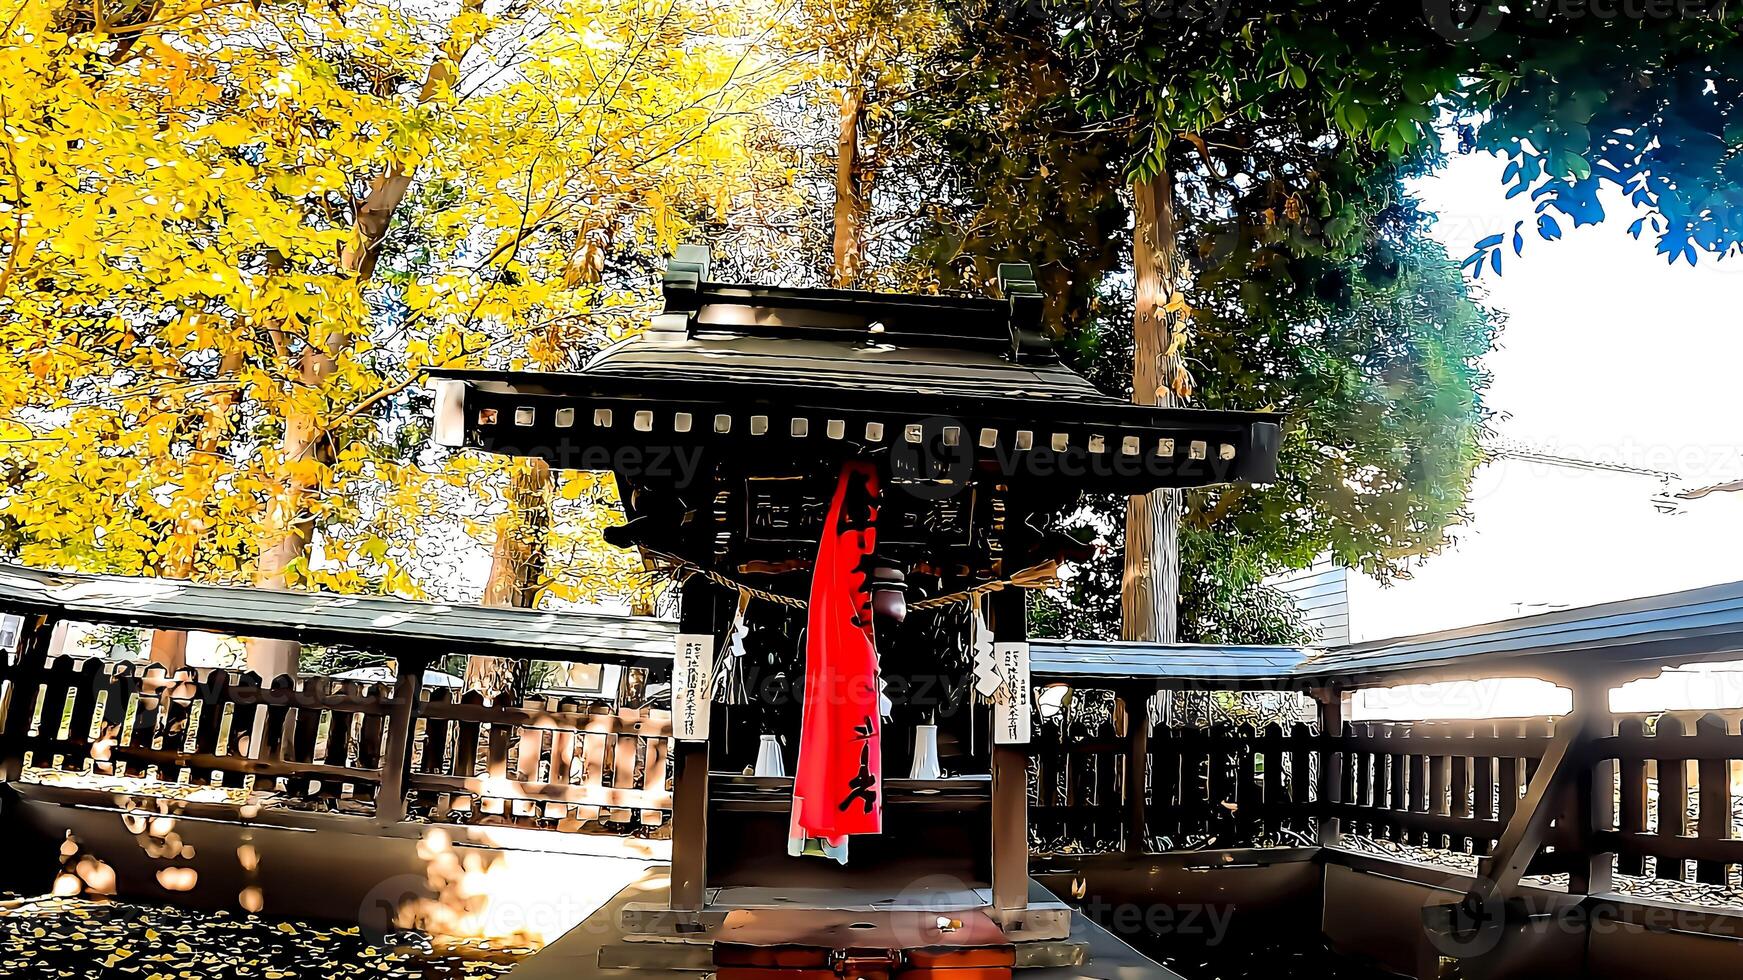 Sarutahiko Shrine is a small shrine that suddenly appears in a residential area of Motomanuma, Suginami Ward, Tokyo, Japan. It was probably surrounded by forests and rice fields in the past. photo